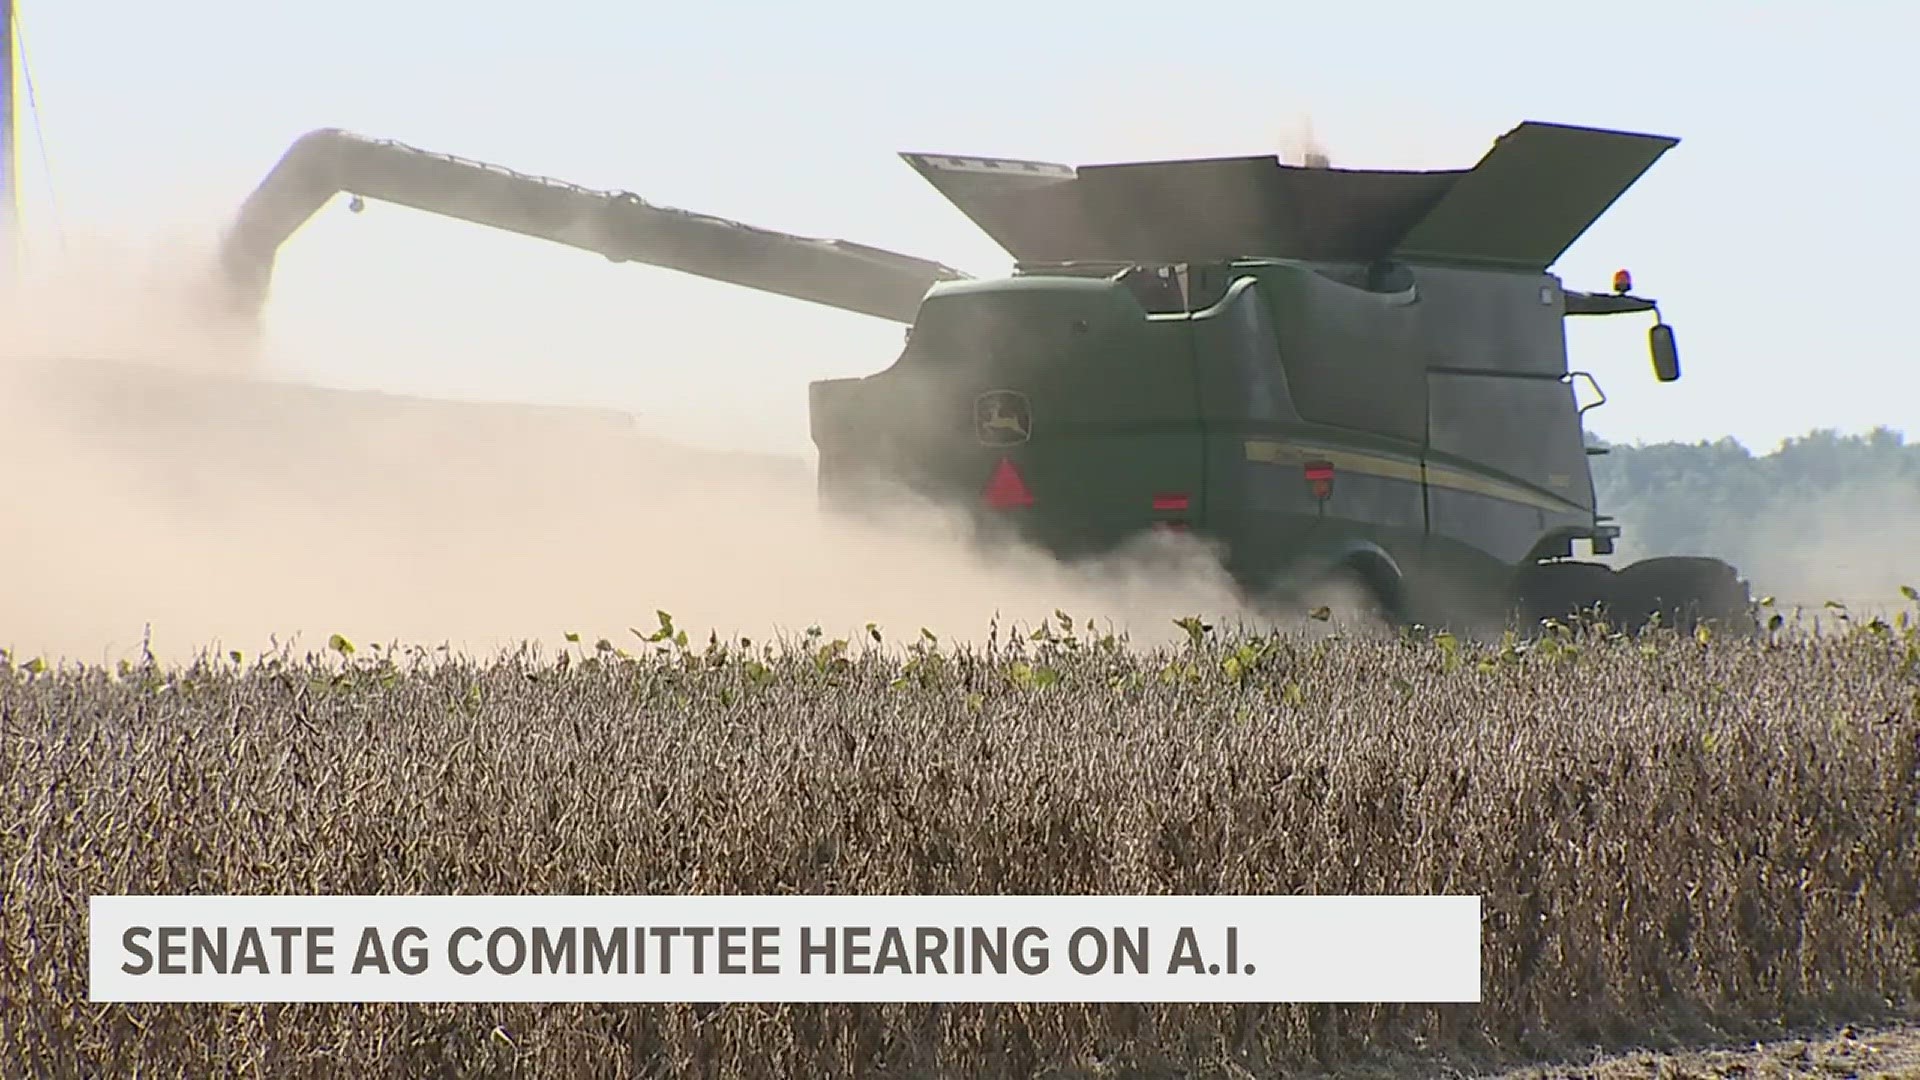 A representative from John Deere was at the hearing and said that A.I. requires a significant amount of user data, which farmers collect when planting or harvesting.